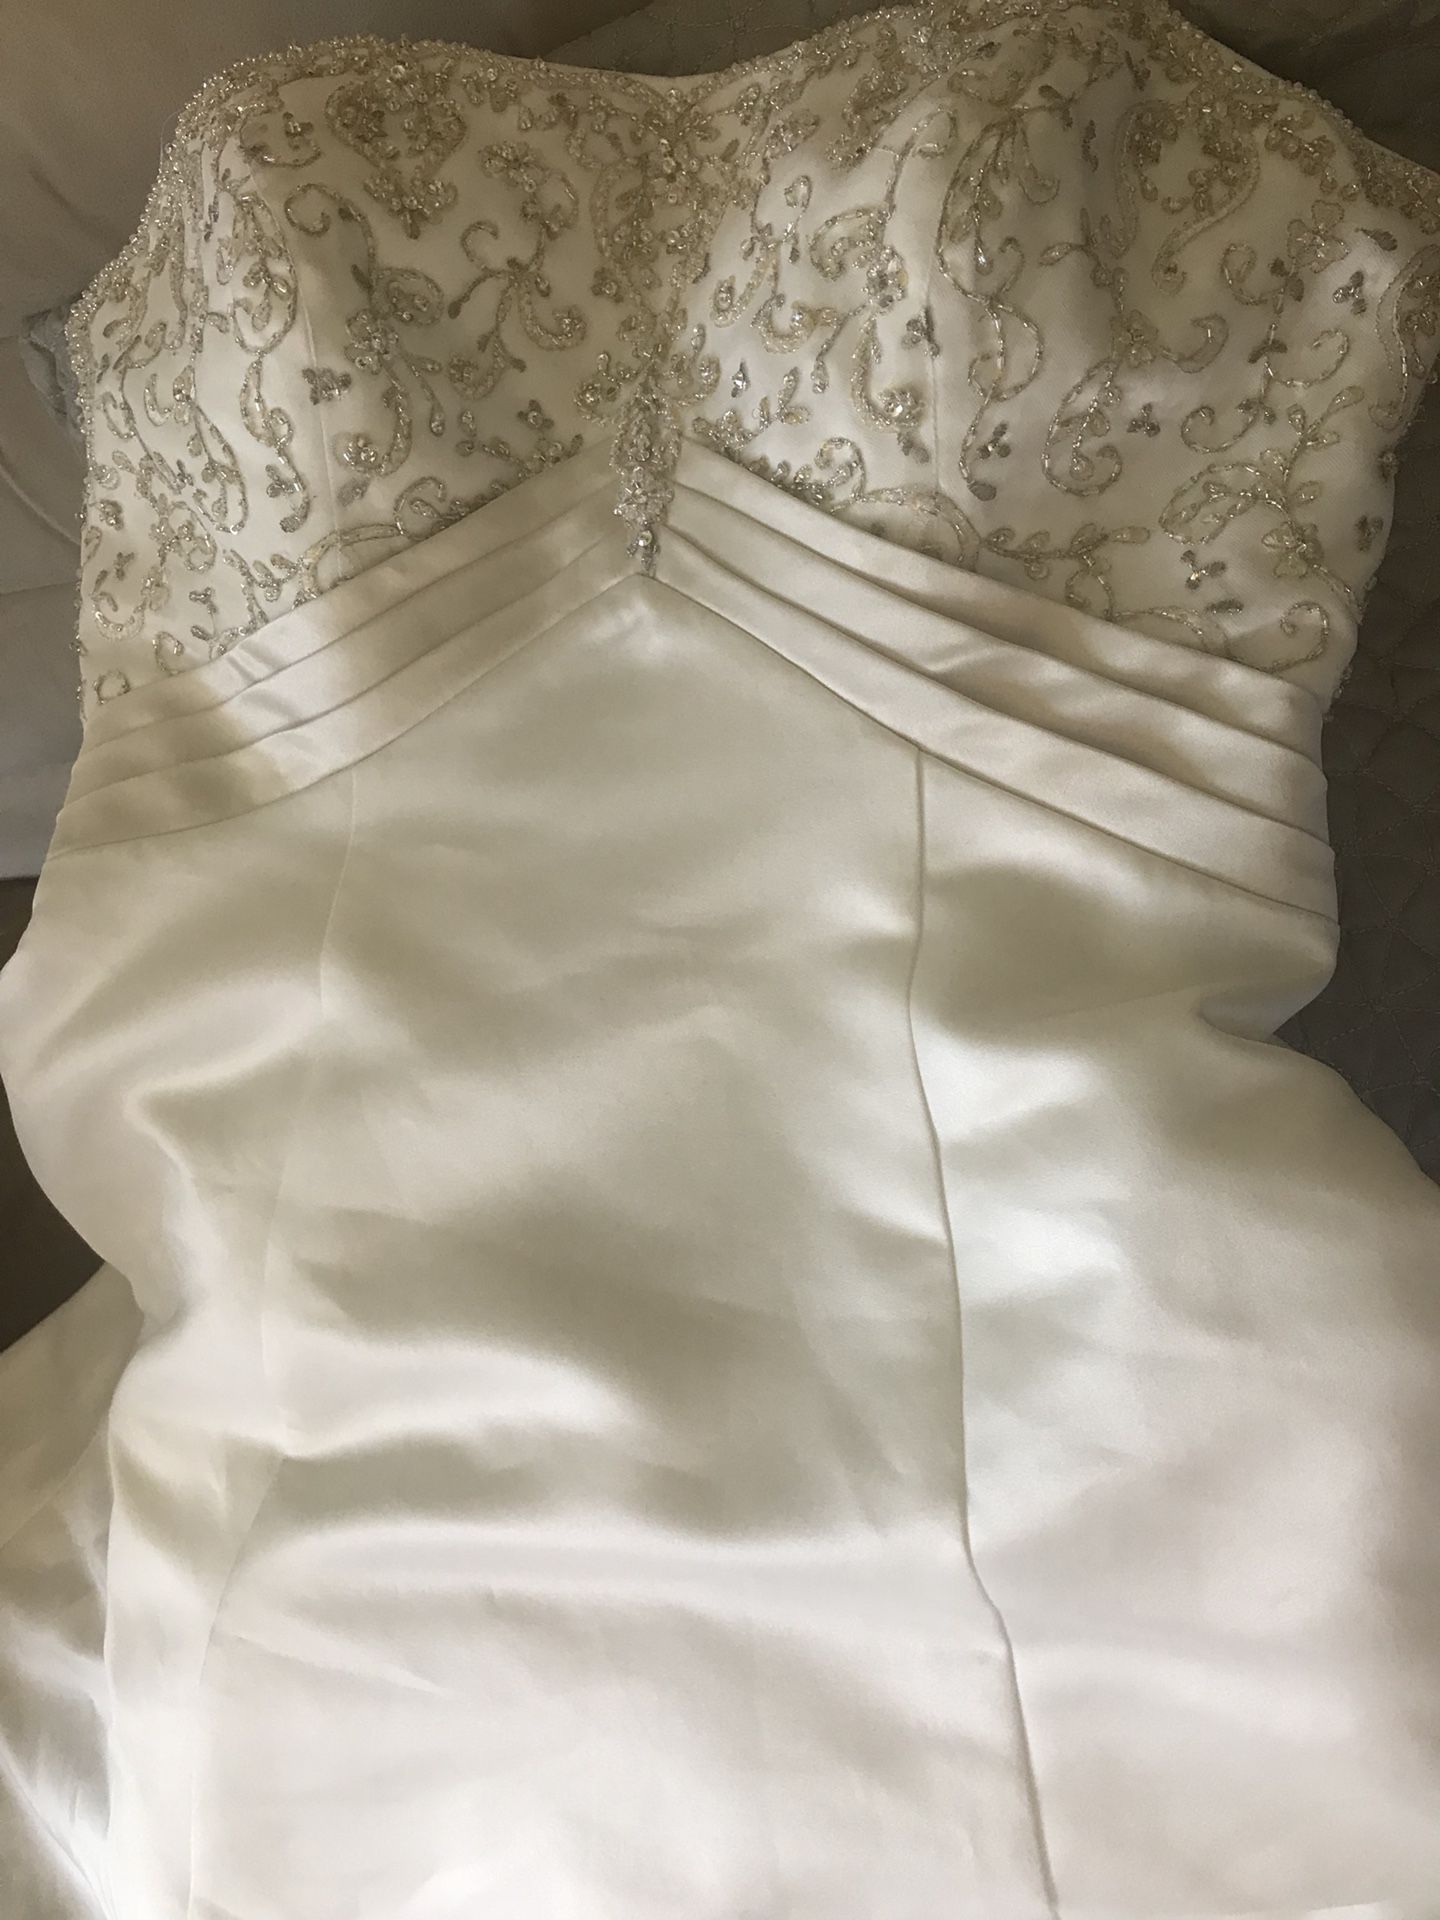 Silk Wedding Dress feel free to ask any questions